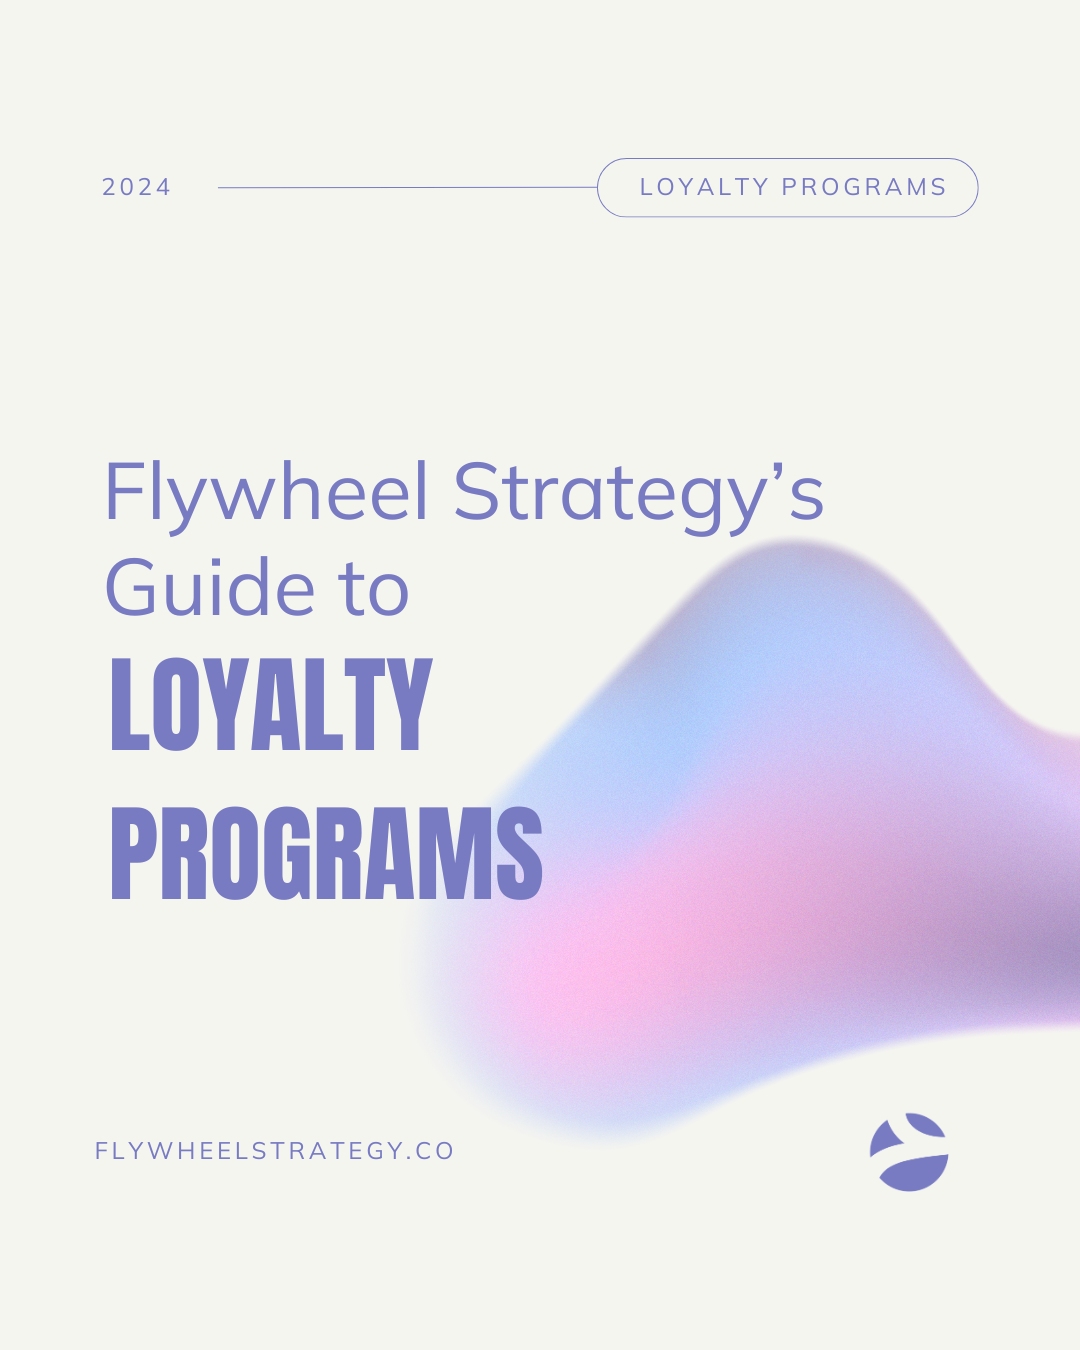 A guide to building loyalty programs. Flywheel Strategy.